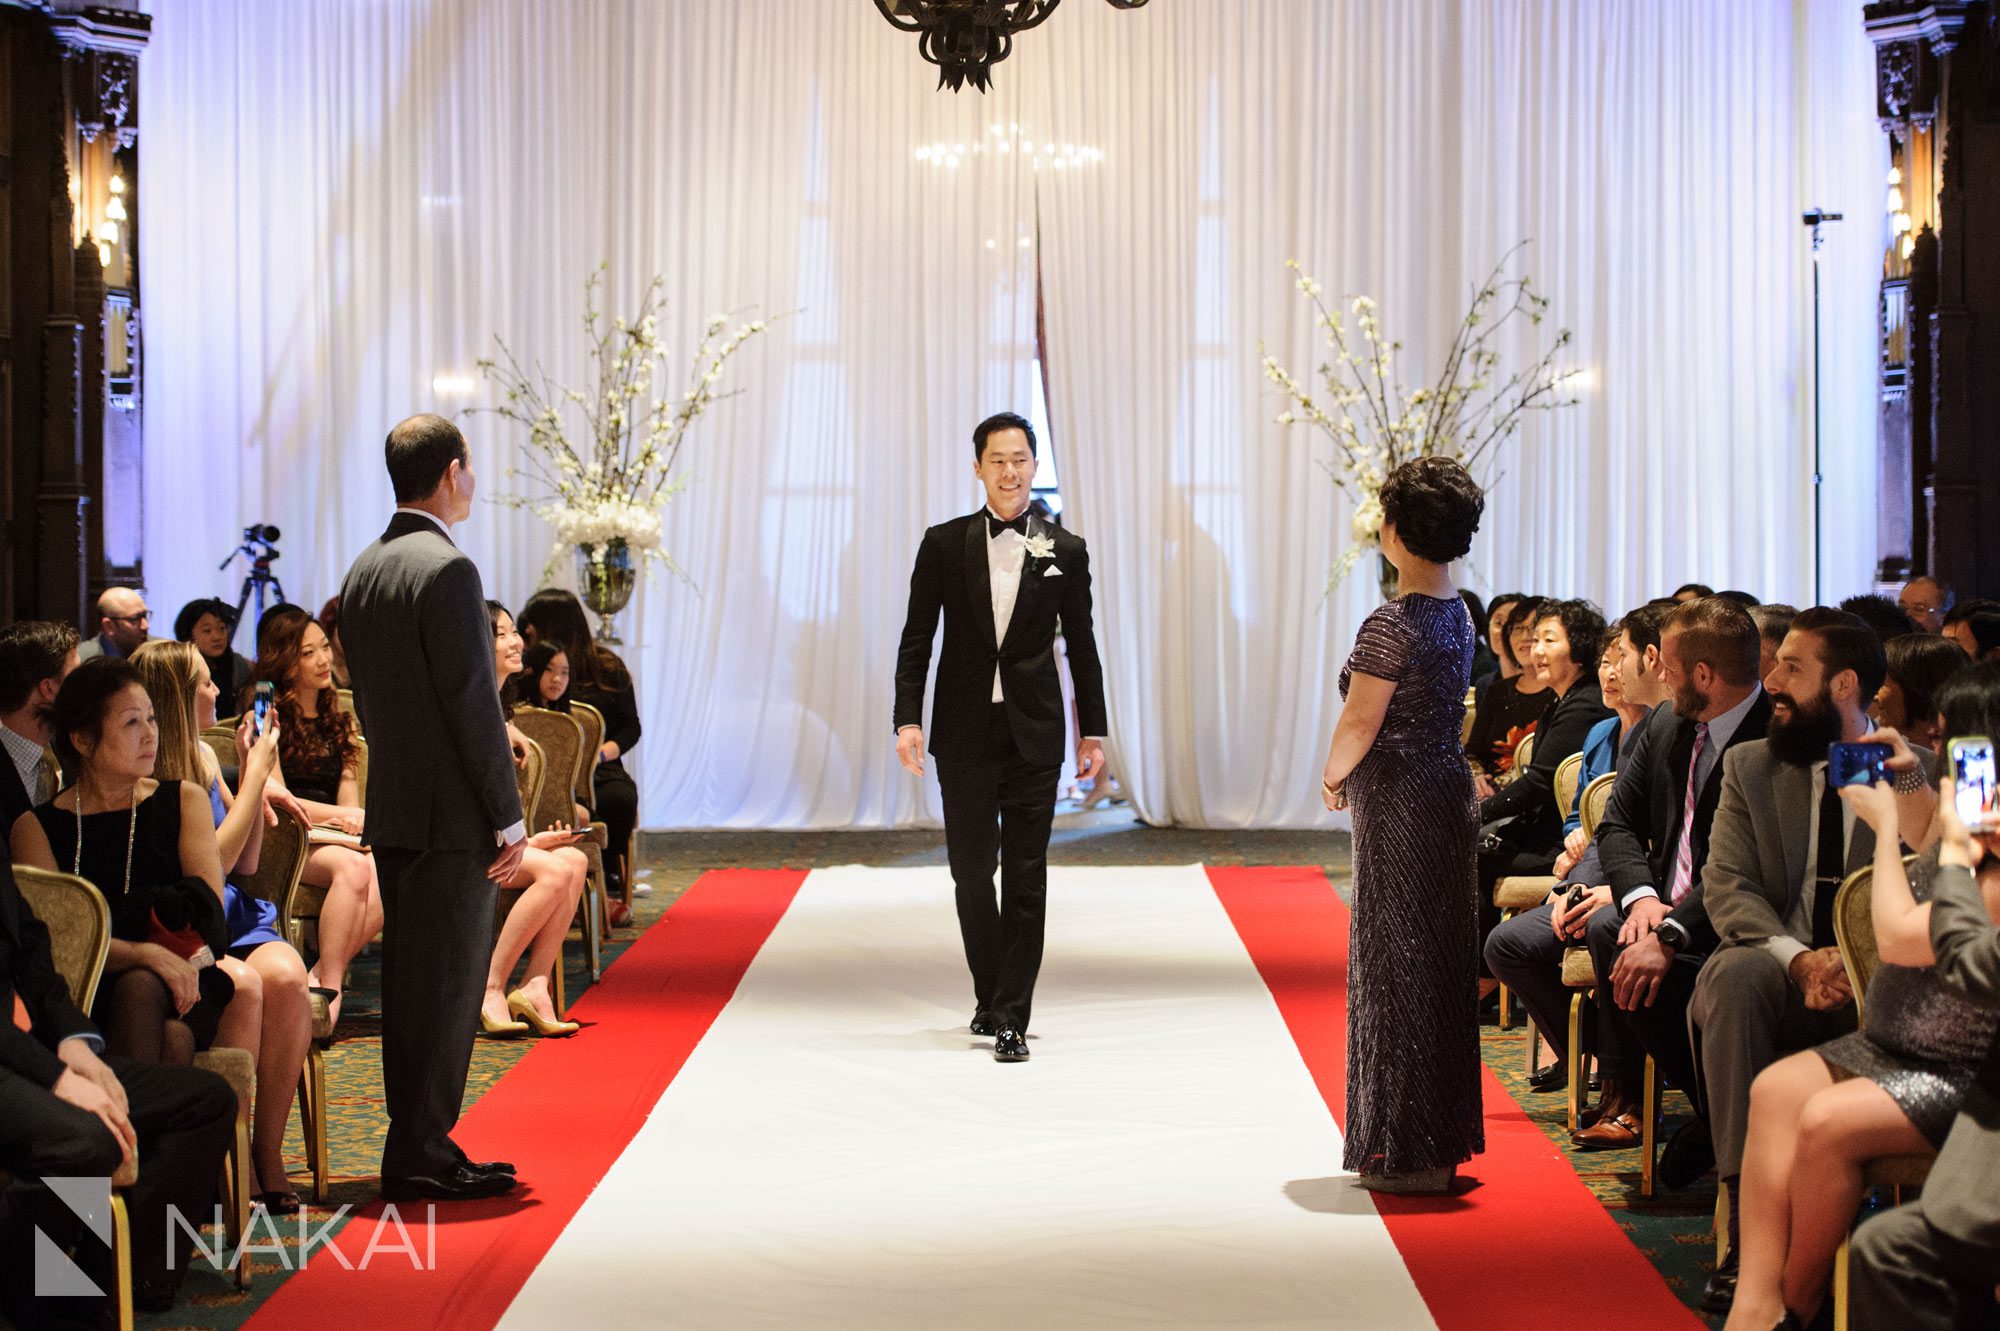 intercontinental magnificent mile wedding photo chicago hall of lions wedding ceremony